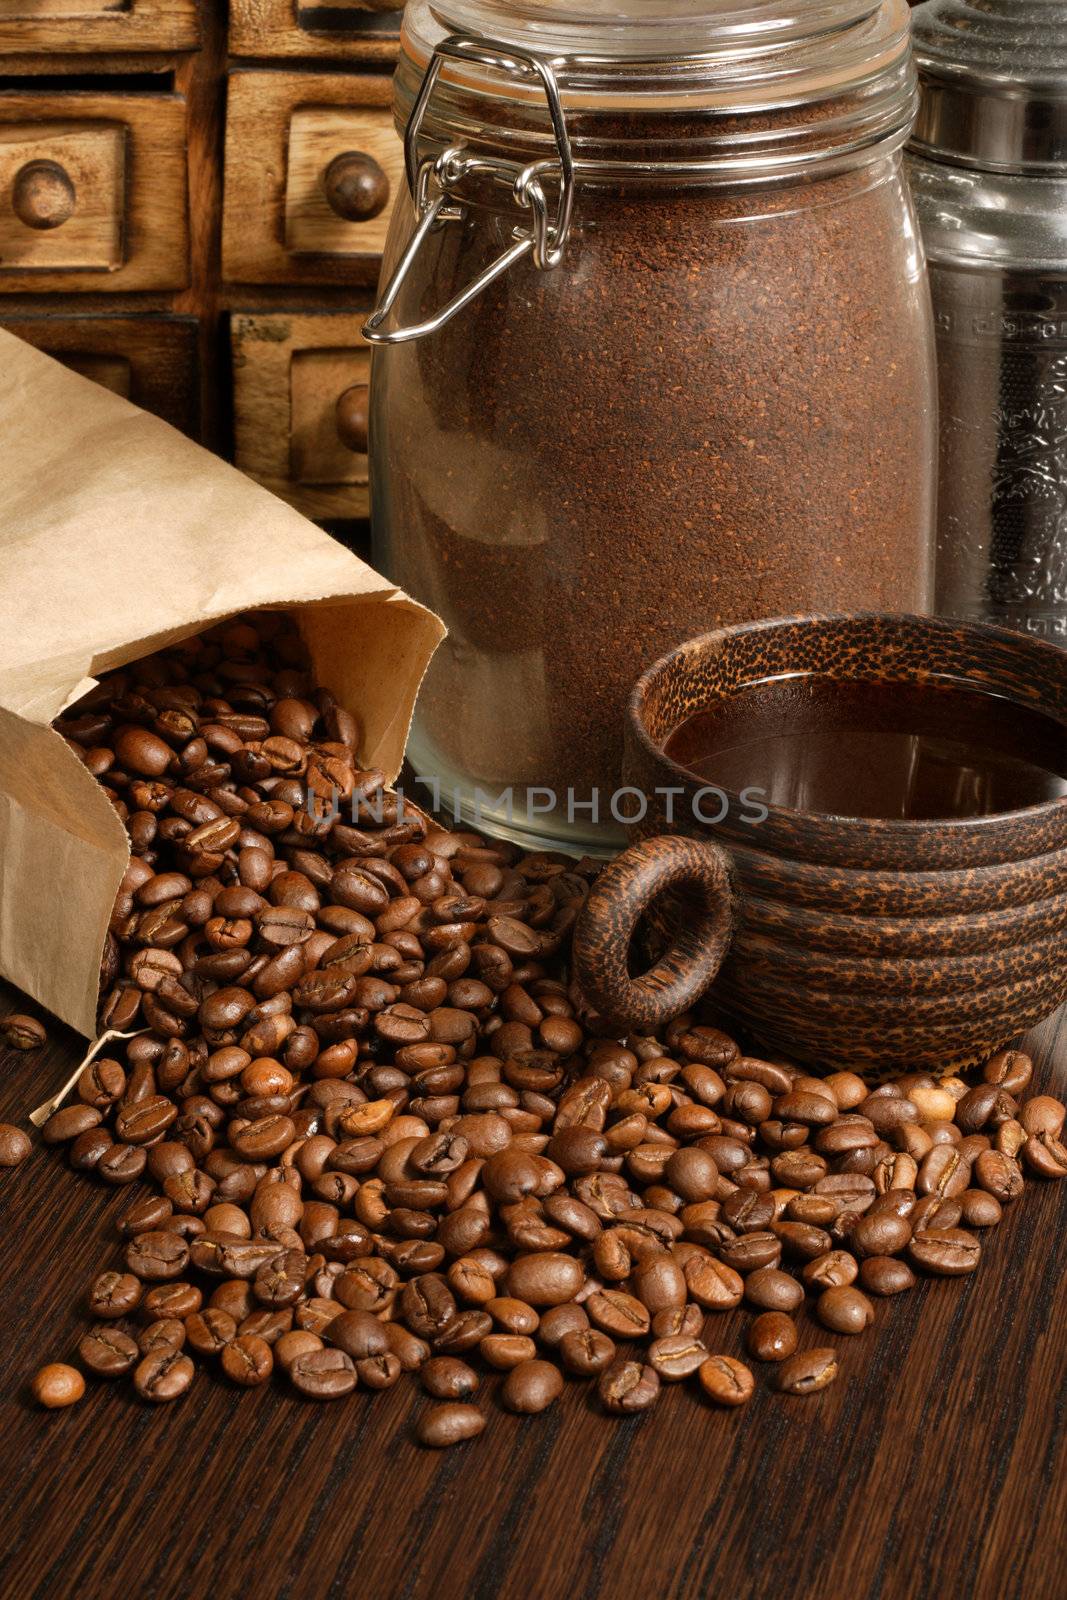 Image of roasted coffee beans, coffee cup, and ground beans on a wooden table.
